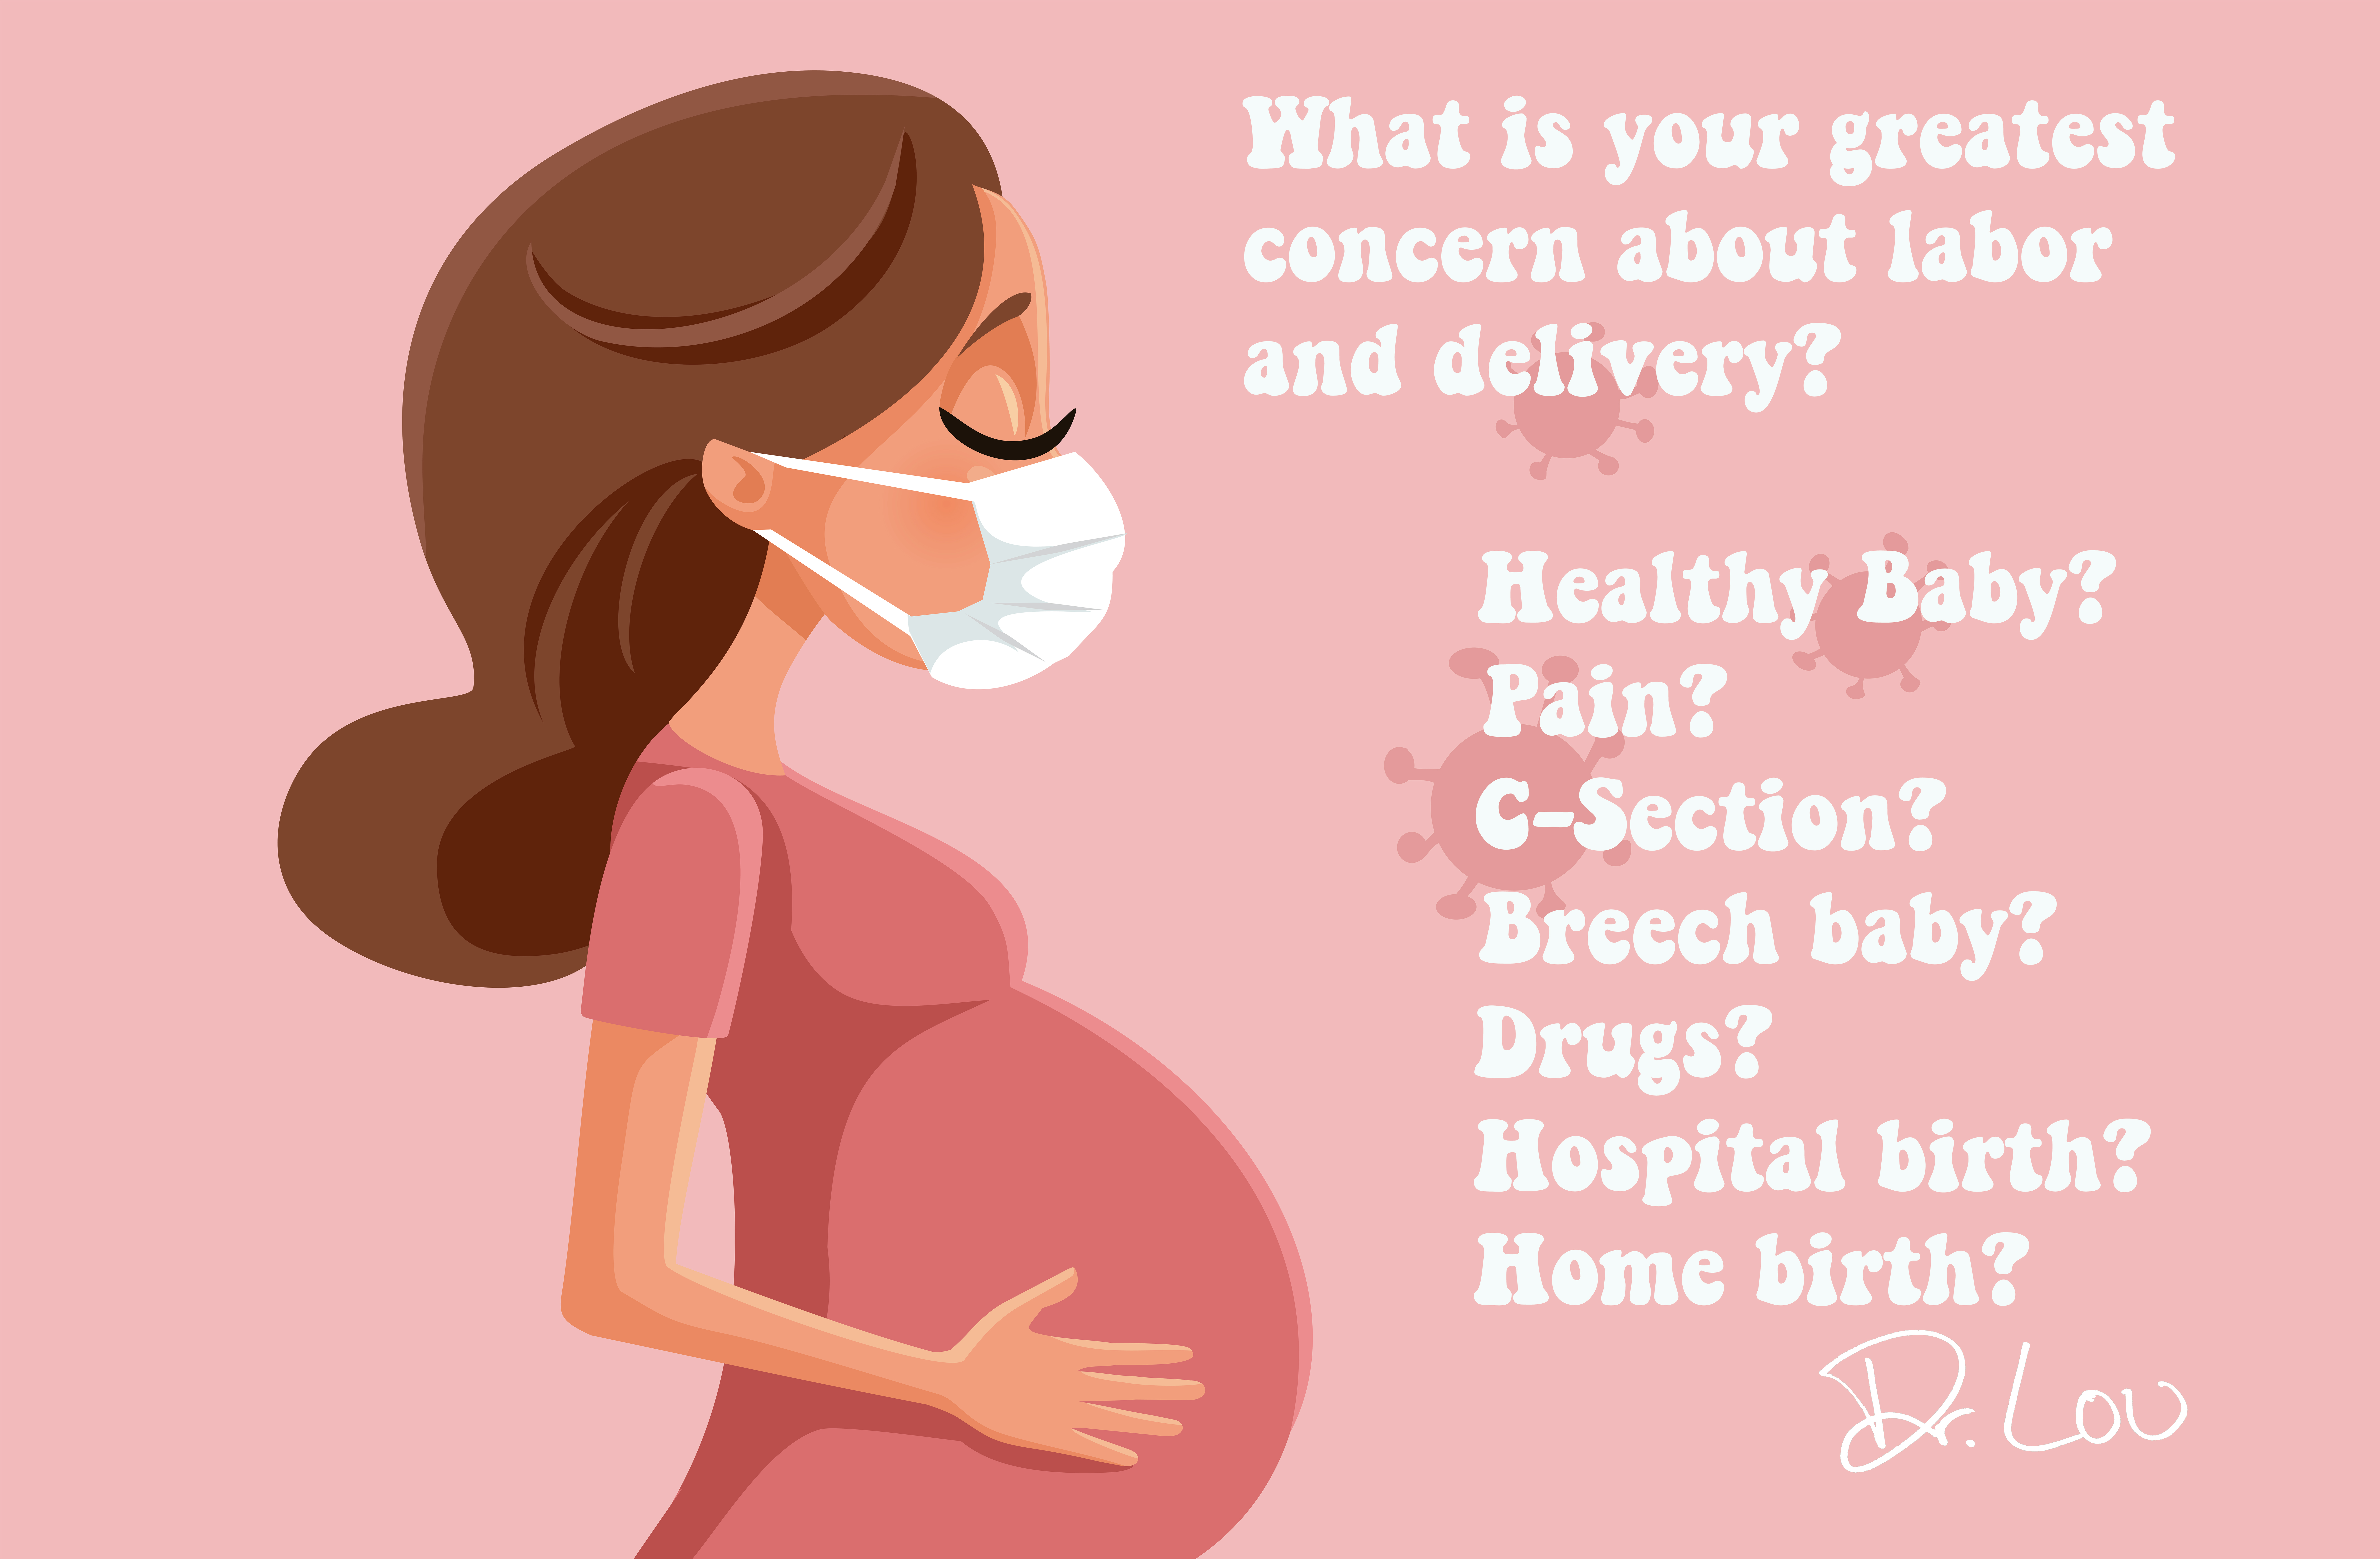 Concerned about labor and delivery in Southern Maine? Call Dr. Lou, board certified pregnancy chiropractor. (207) 774-6251. Portland, Maine. Plenty of parking, 24/7 doctor access. Too good to be true? You don't know Dr. Lou!